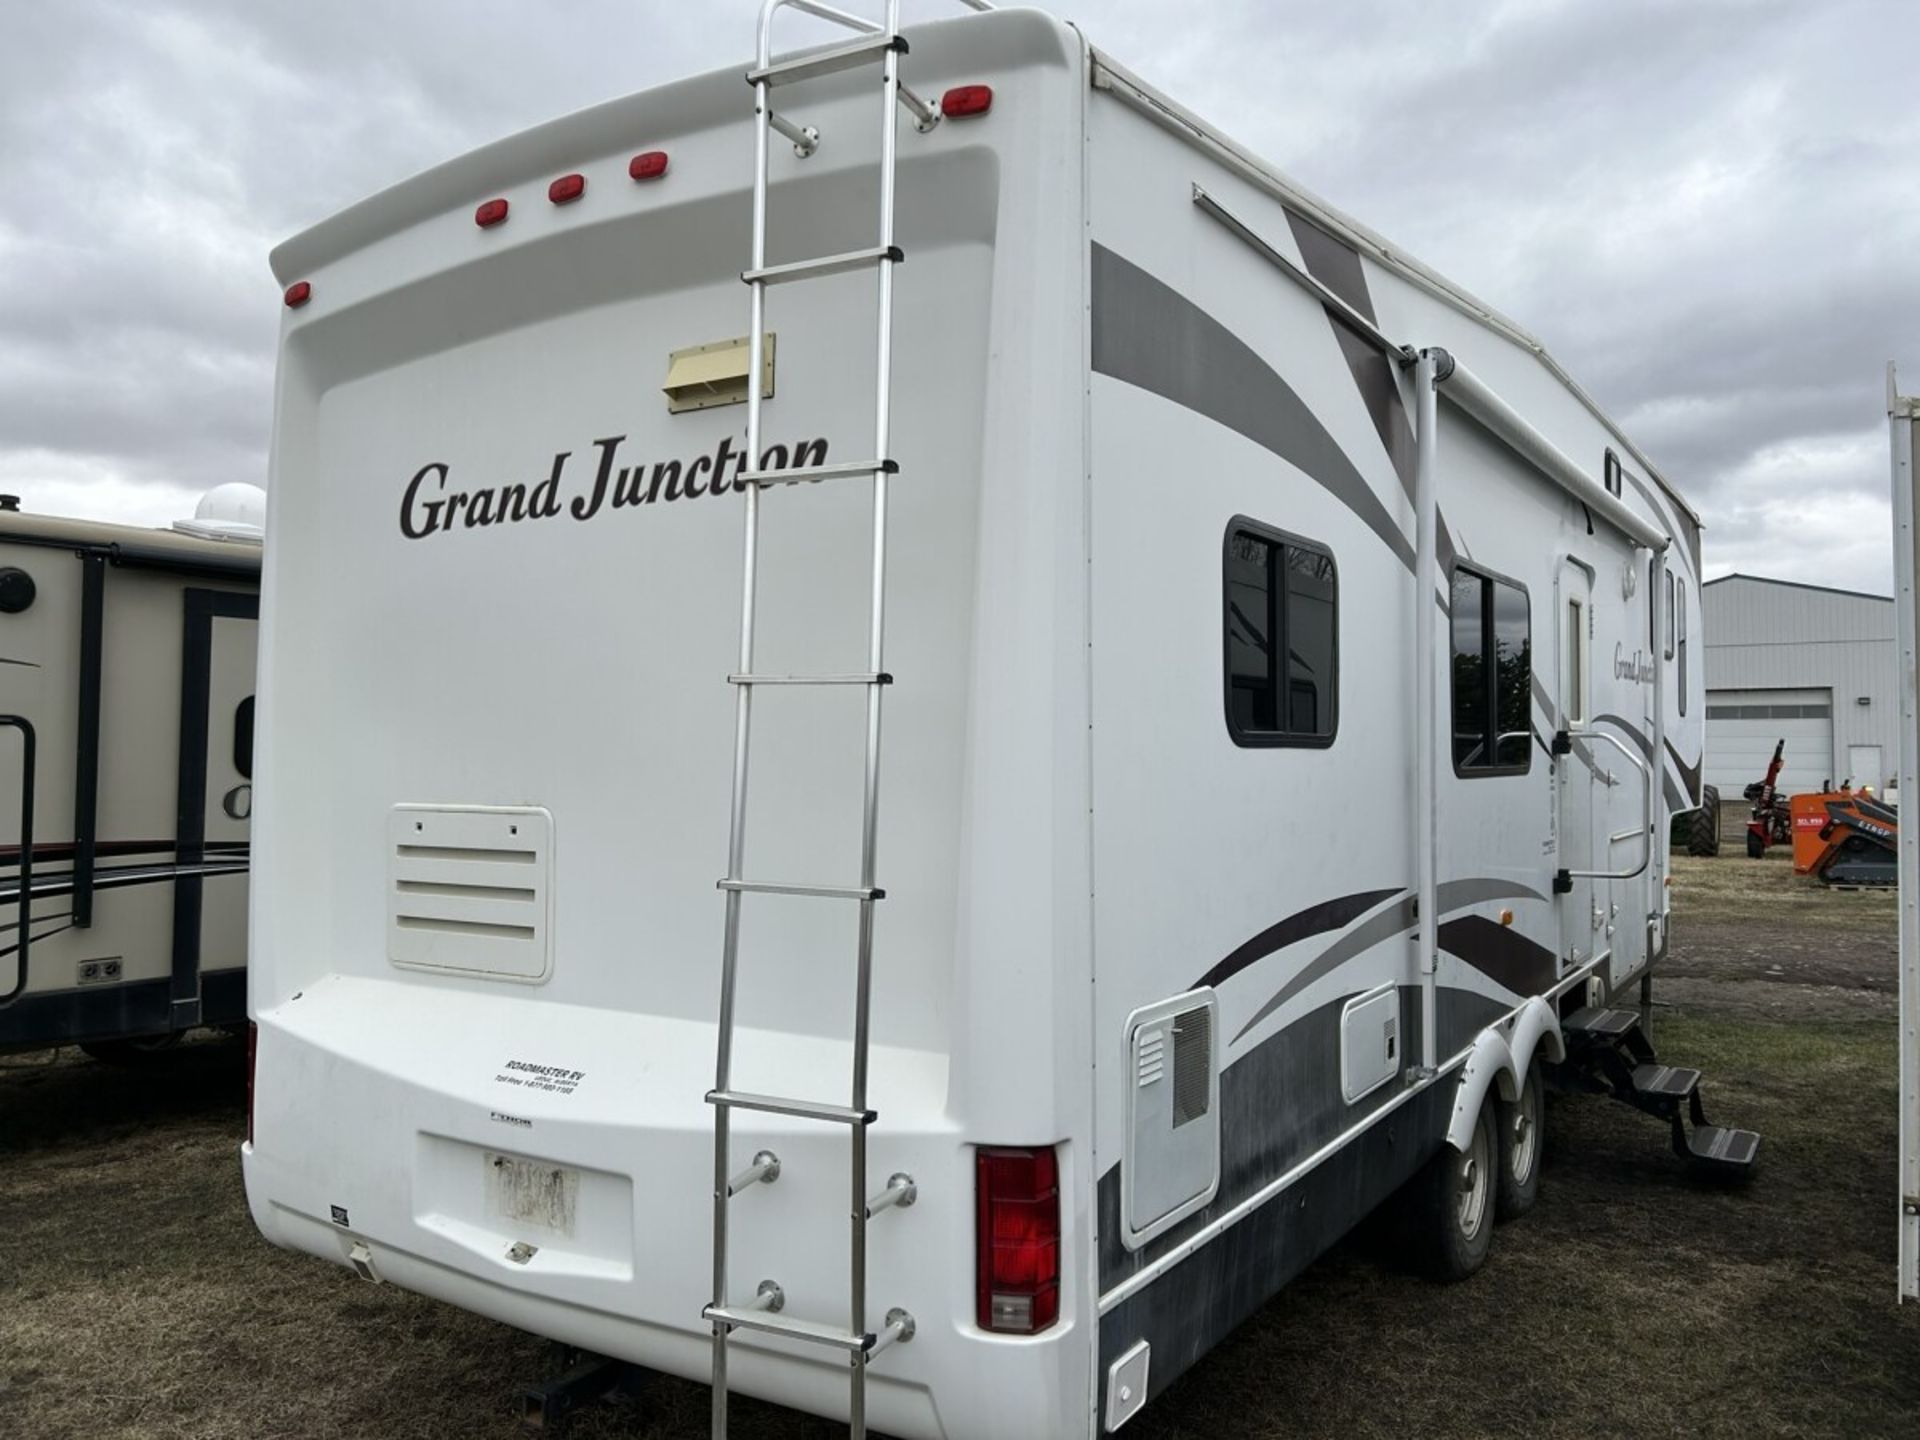 2007 GRAND JUNCTION 29DRK BY DUTCHMEN - DOUBLE SLIDE, AWNING, AC, REAR KITCHEN, FRONT QUEEN - Image 5 of 16